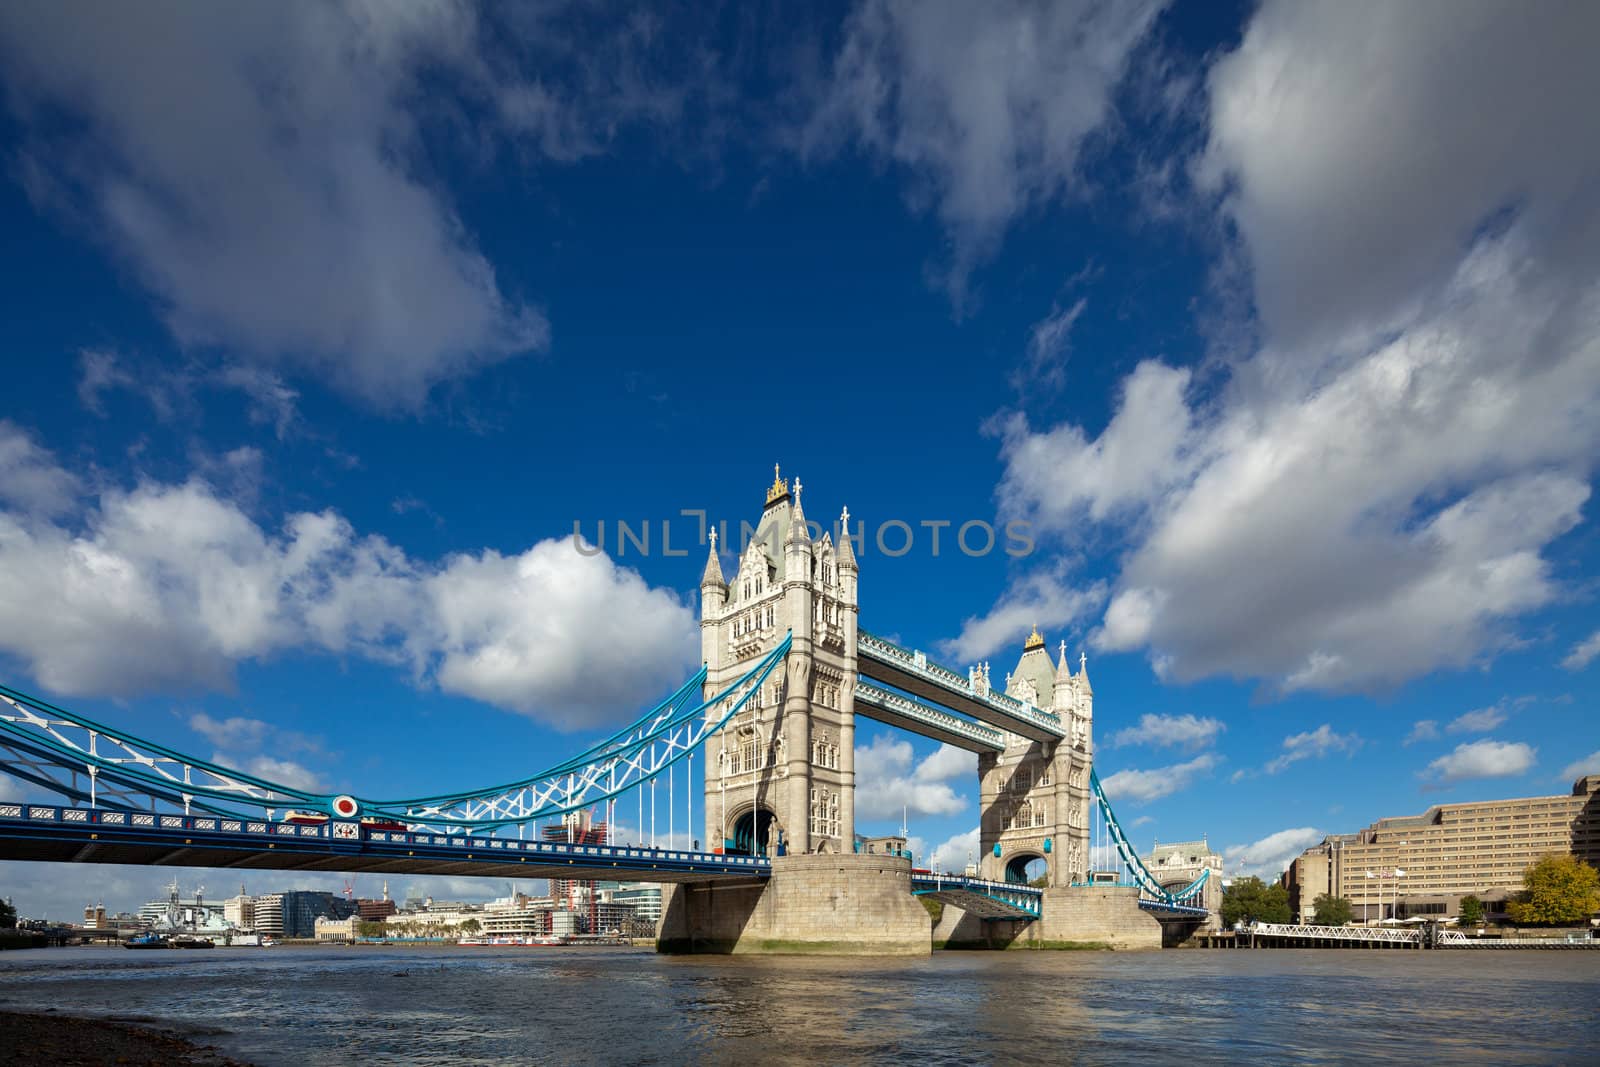 The famous Tower Bridge in London, UK by Antartis